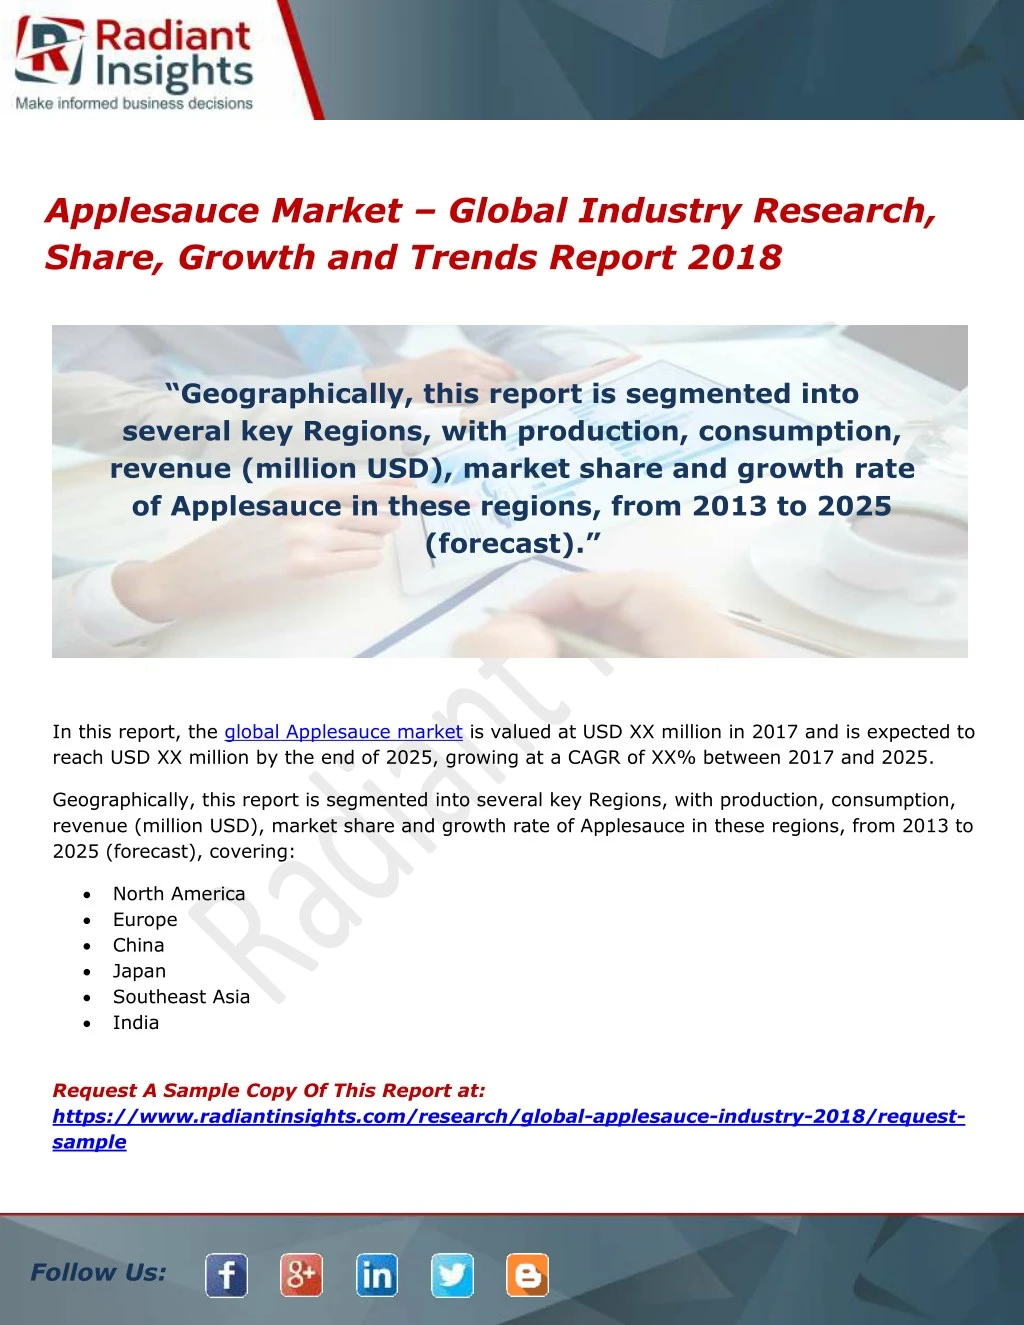 applesauce market global industry research share